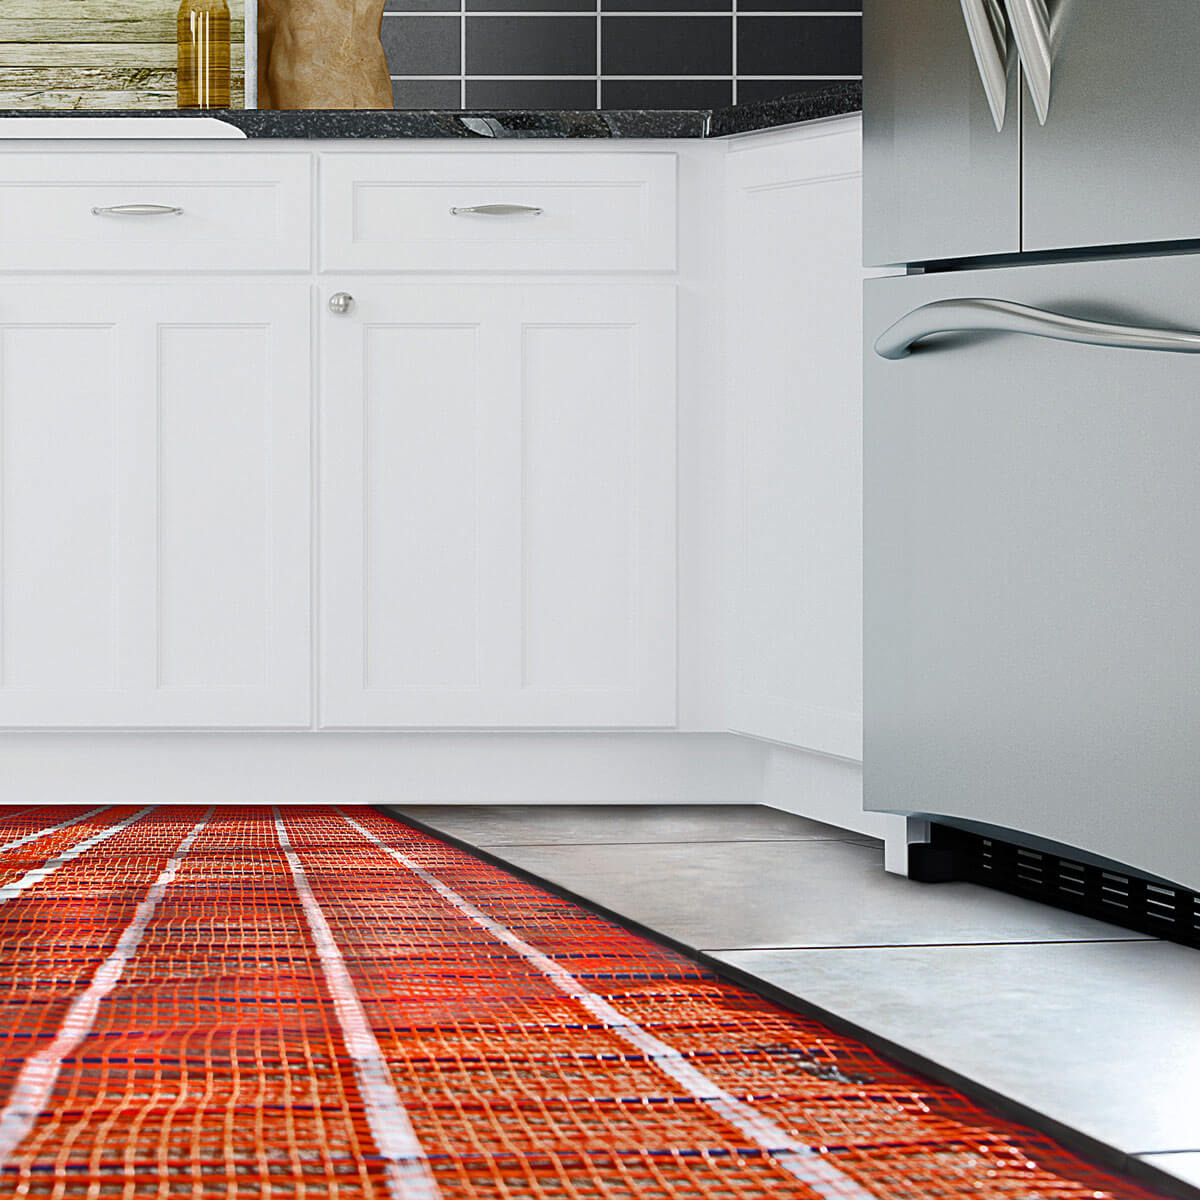 Electric Radiant Floor Heat, How Much Does It Cost To Install Heated Tile Floors